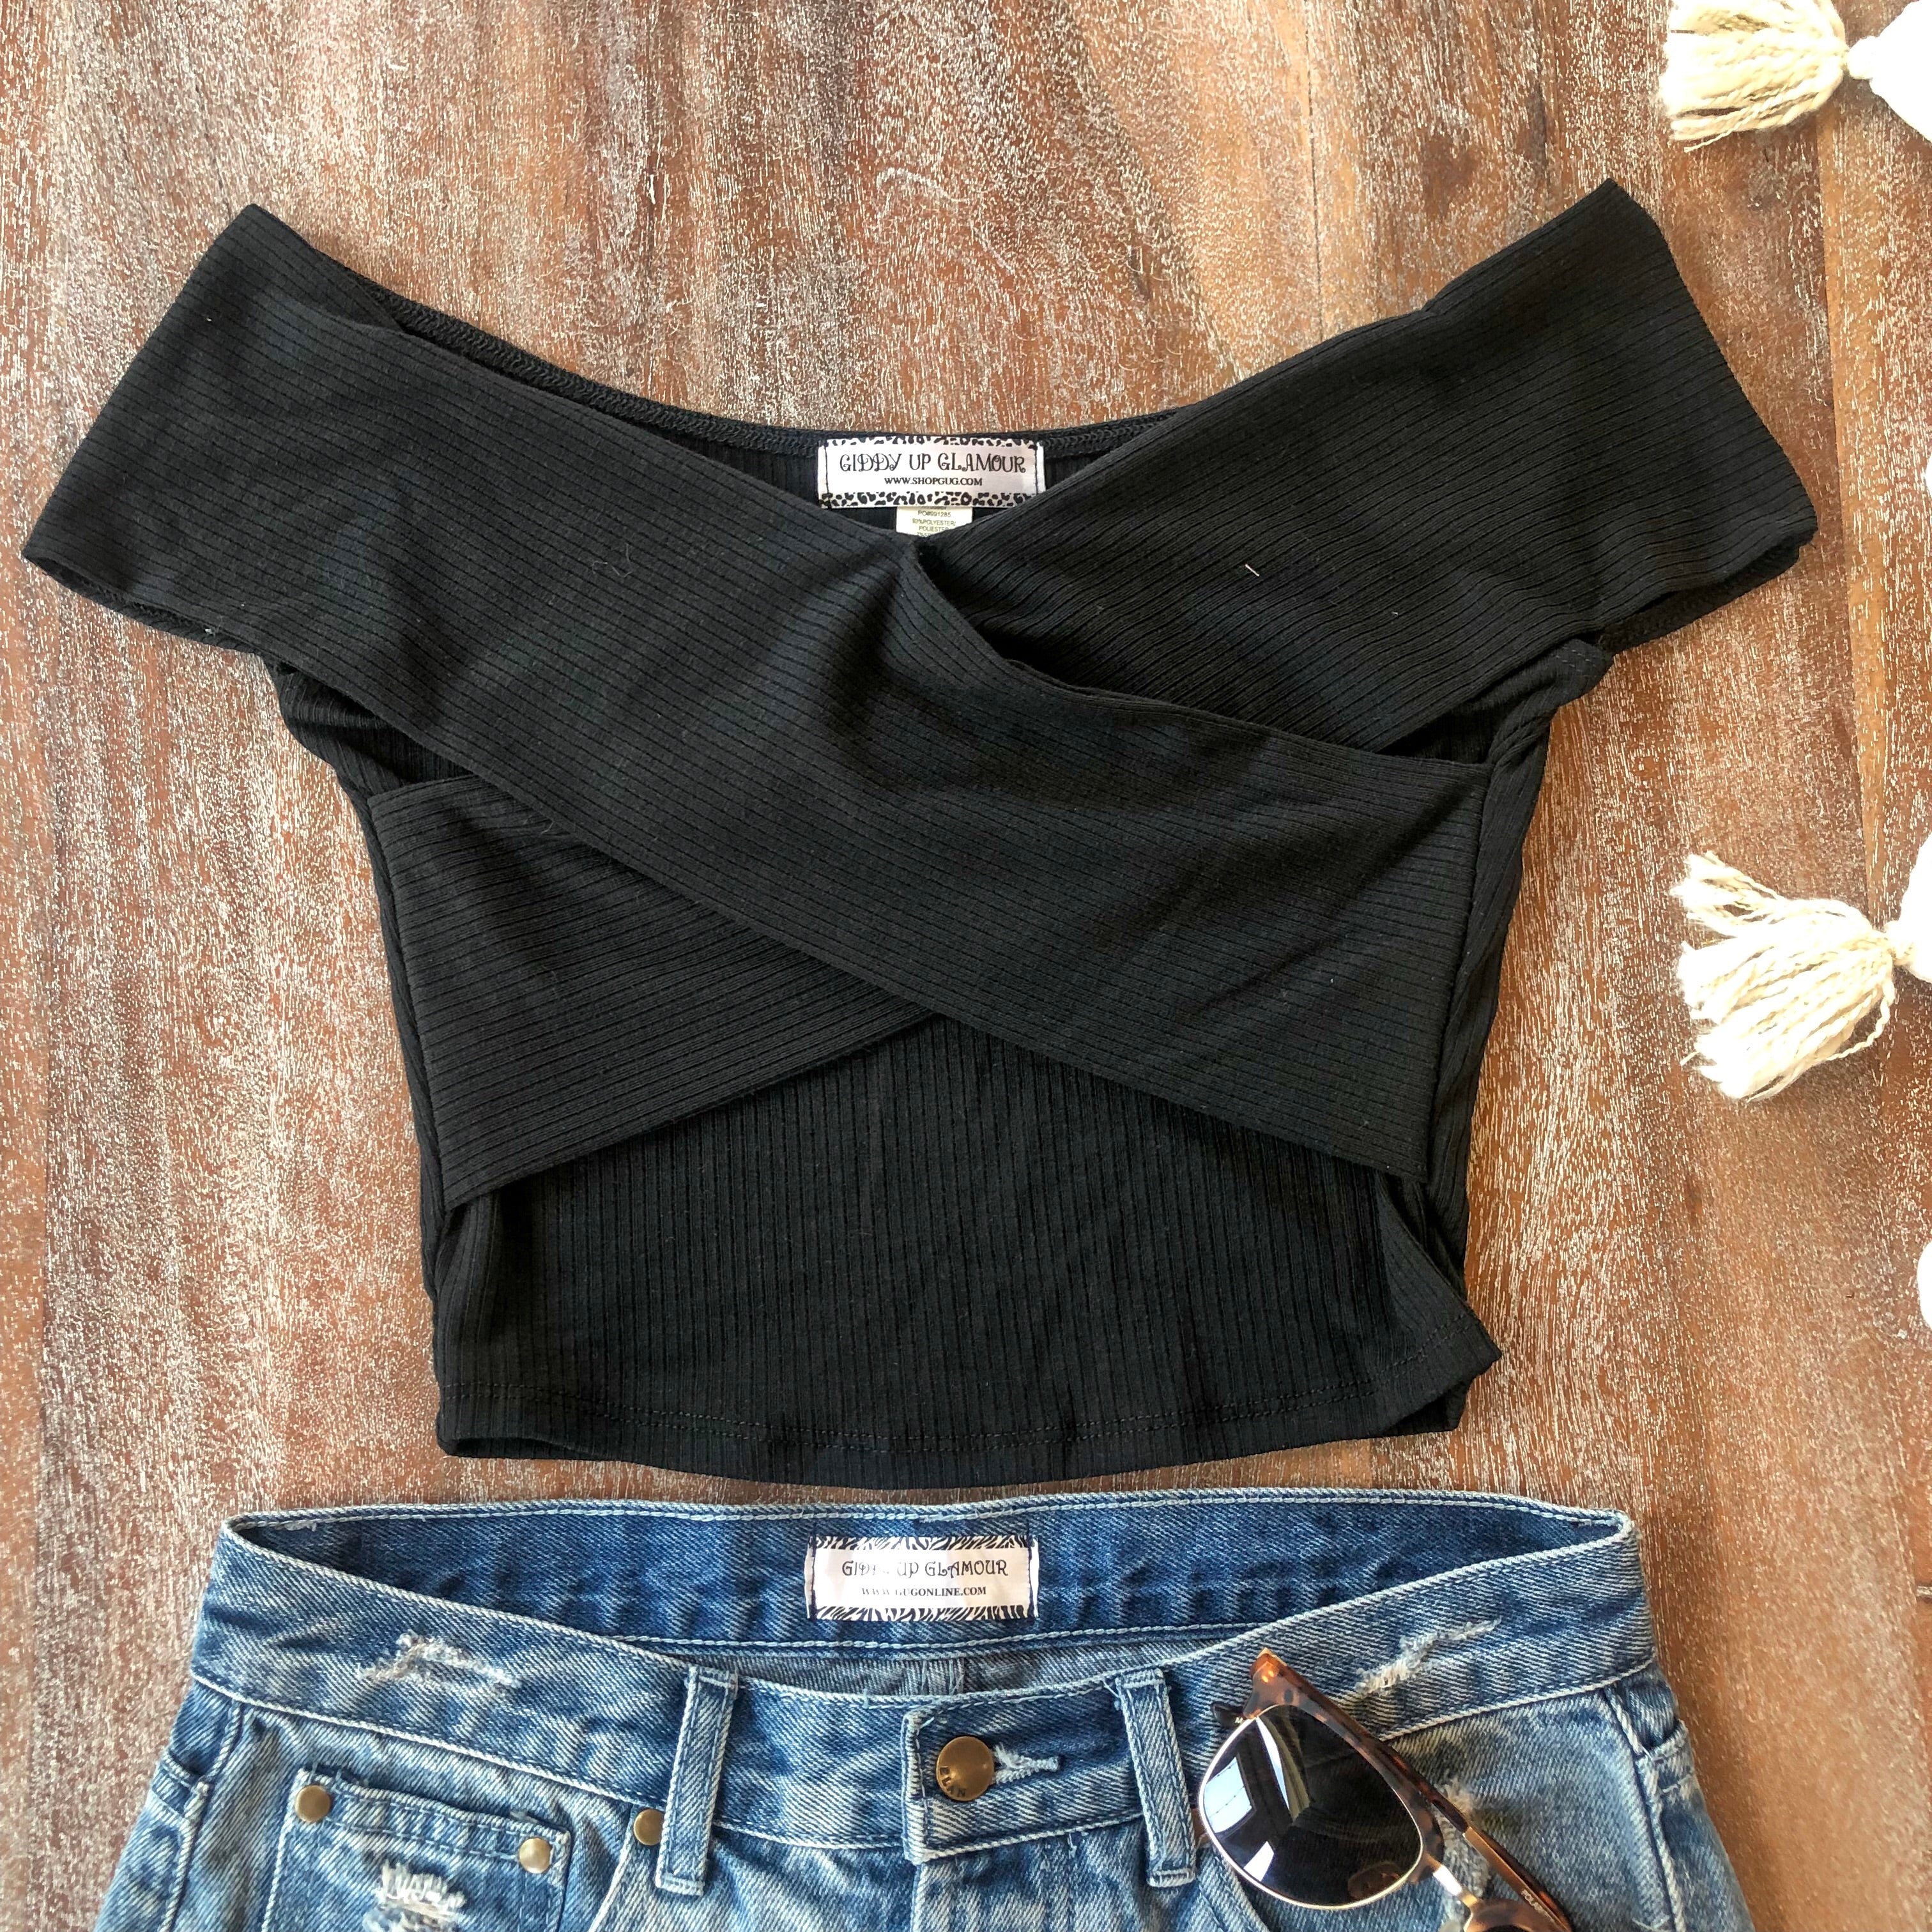 Make It True Ribbed Criss-Cross Crop Top in Black - Giddy Up Glamour Boutique